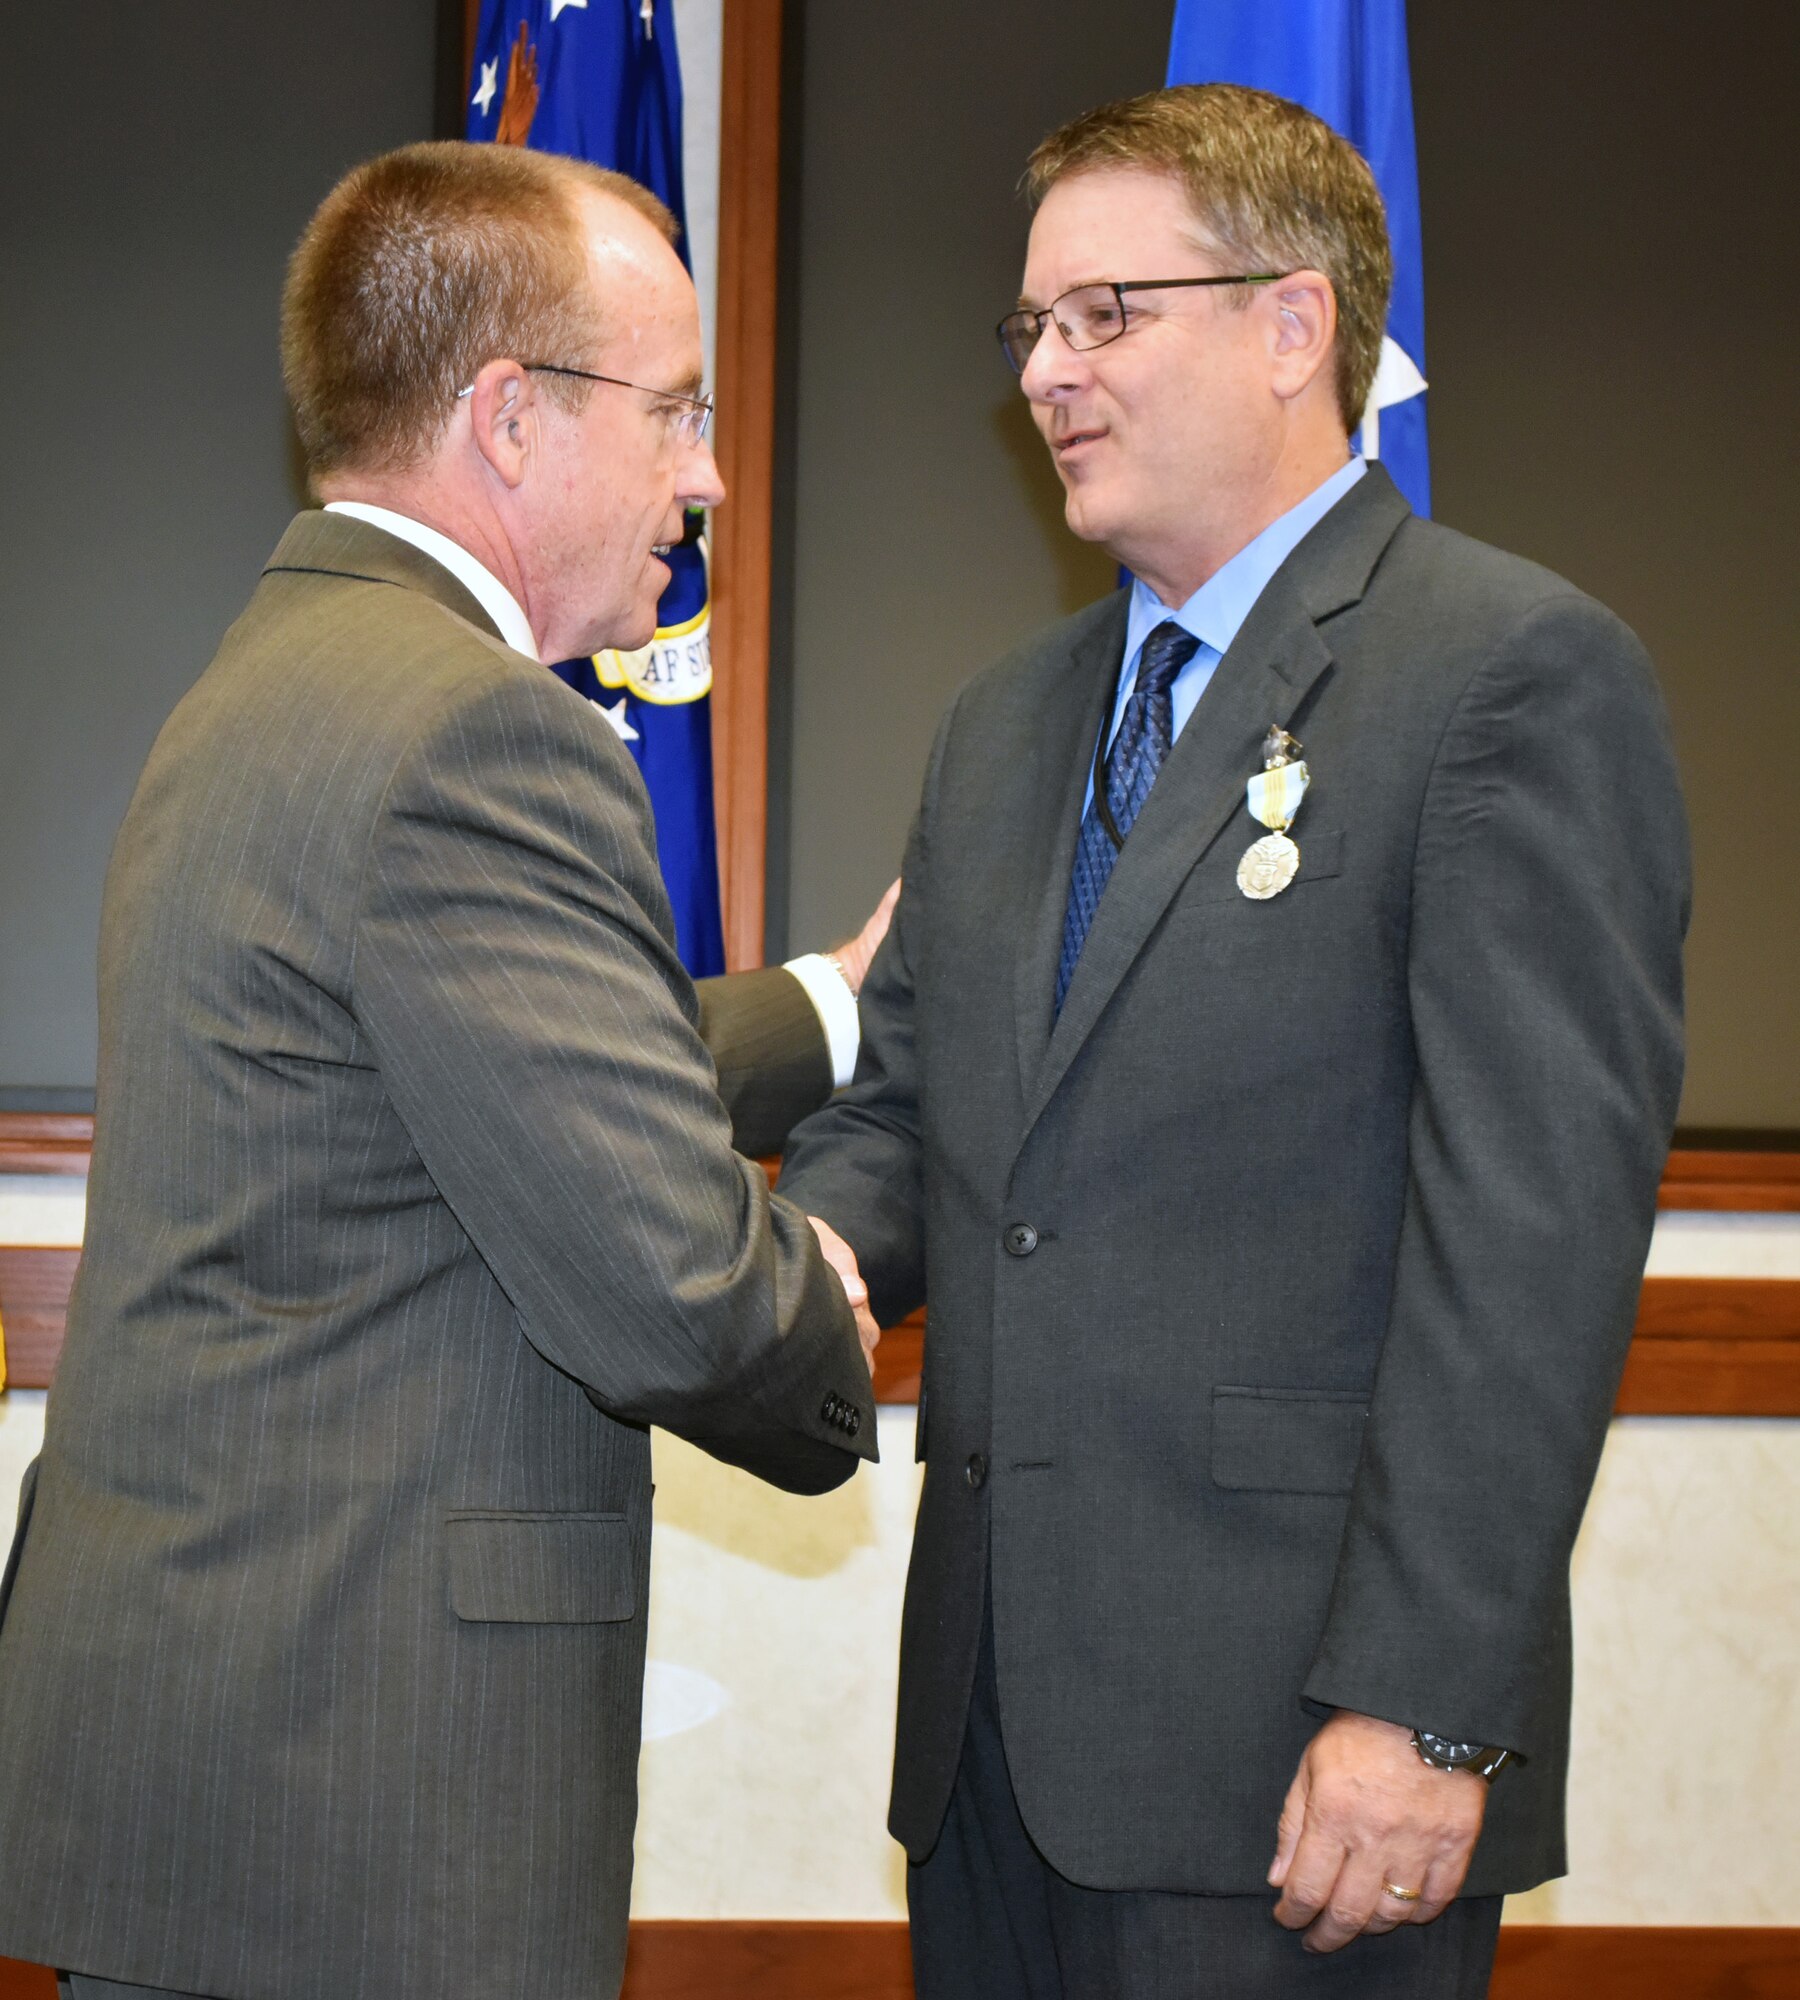 Jeffrey Allen, Air Force Sustainment Center executive director, congratulates Steven Alsup on receiving the Meritorious Civilian Service Award during a farewell ceremony for the AFSC Logistics Director Aug. 25 in the Anaconda Conference Room, Bldg. 3001.